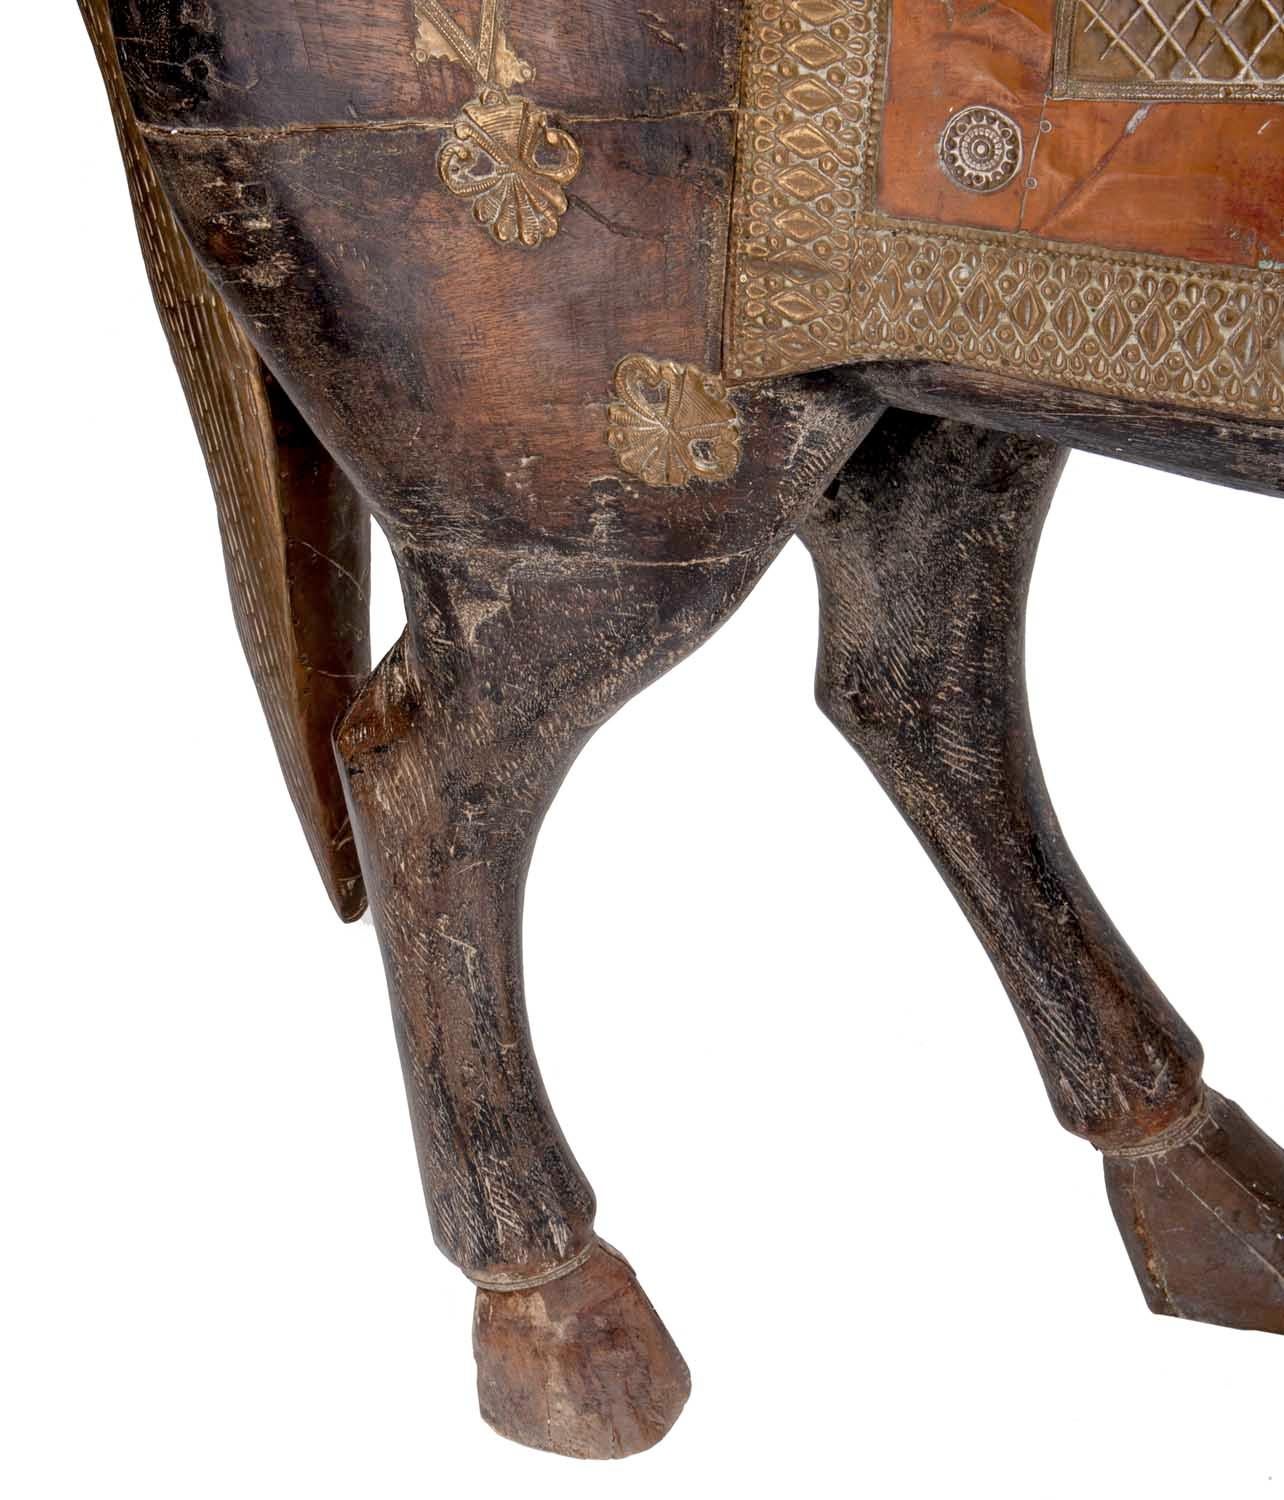 Hand-Crafted Antique Mango Wood Painted Horse from Delhi, India